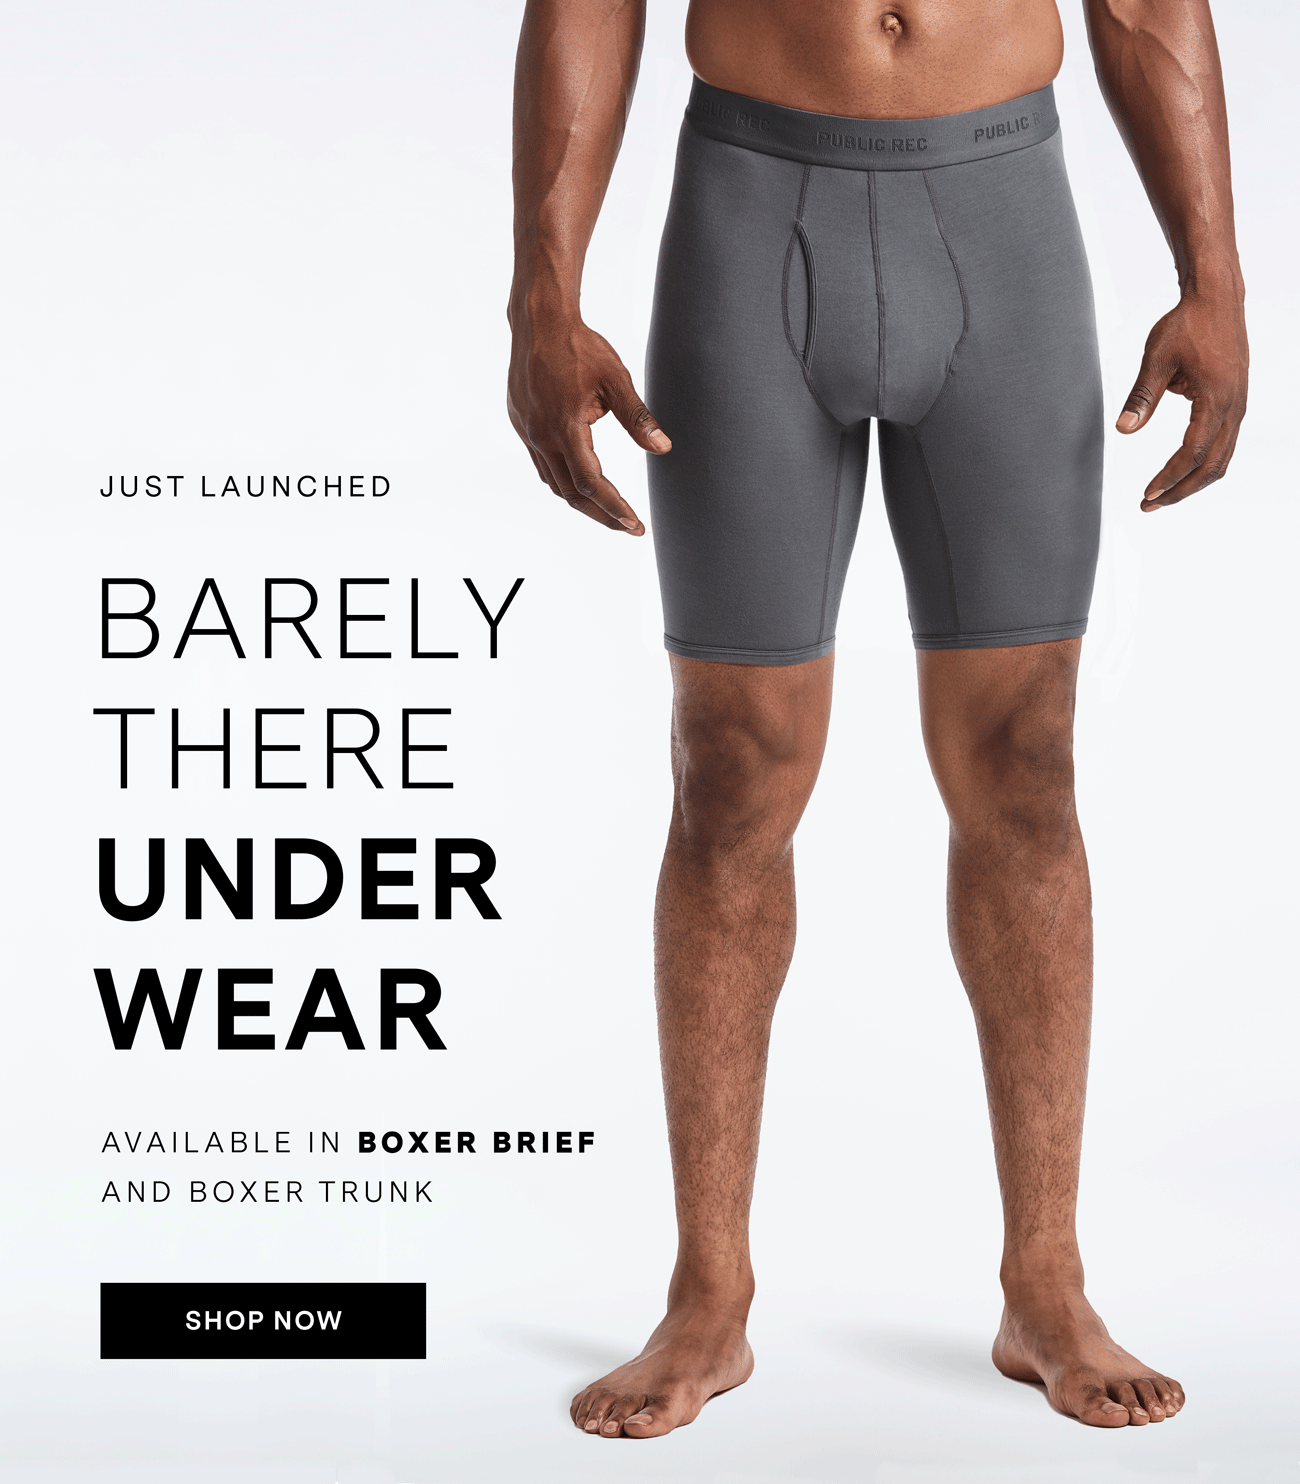 JUST LAUNCHED: BARELY THERE UNDERWEAR. Available in Boxer Brief and Boxer Trunk. SHOP NOW